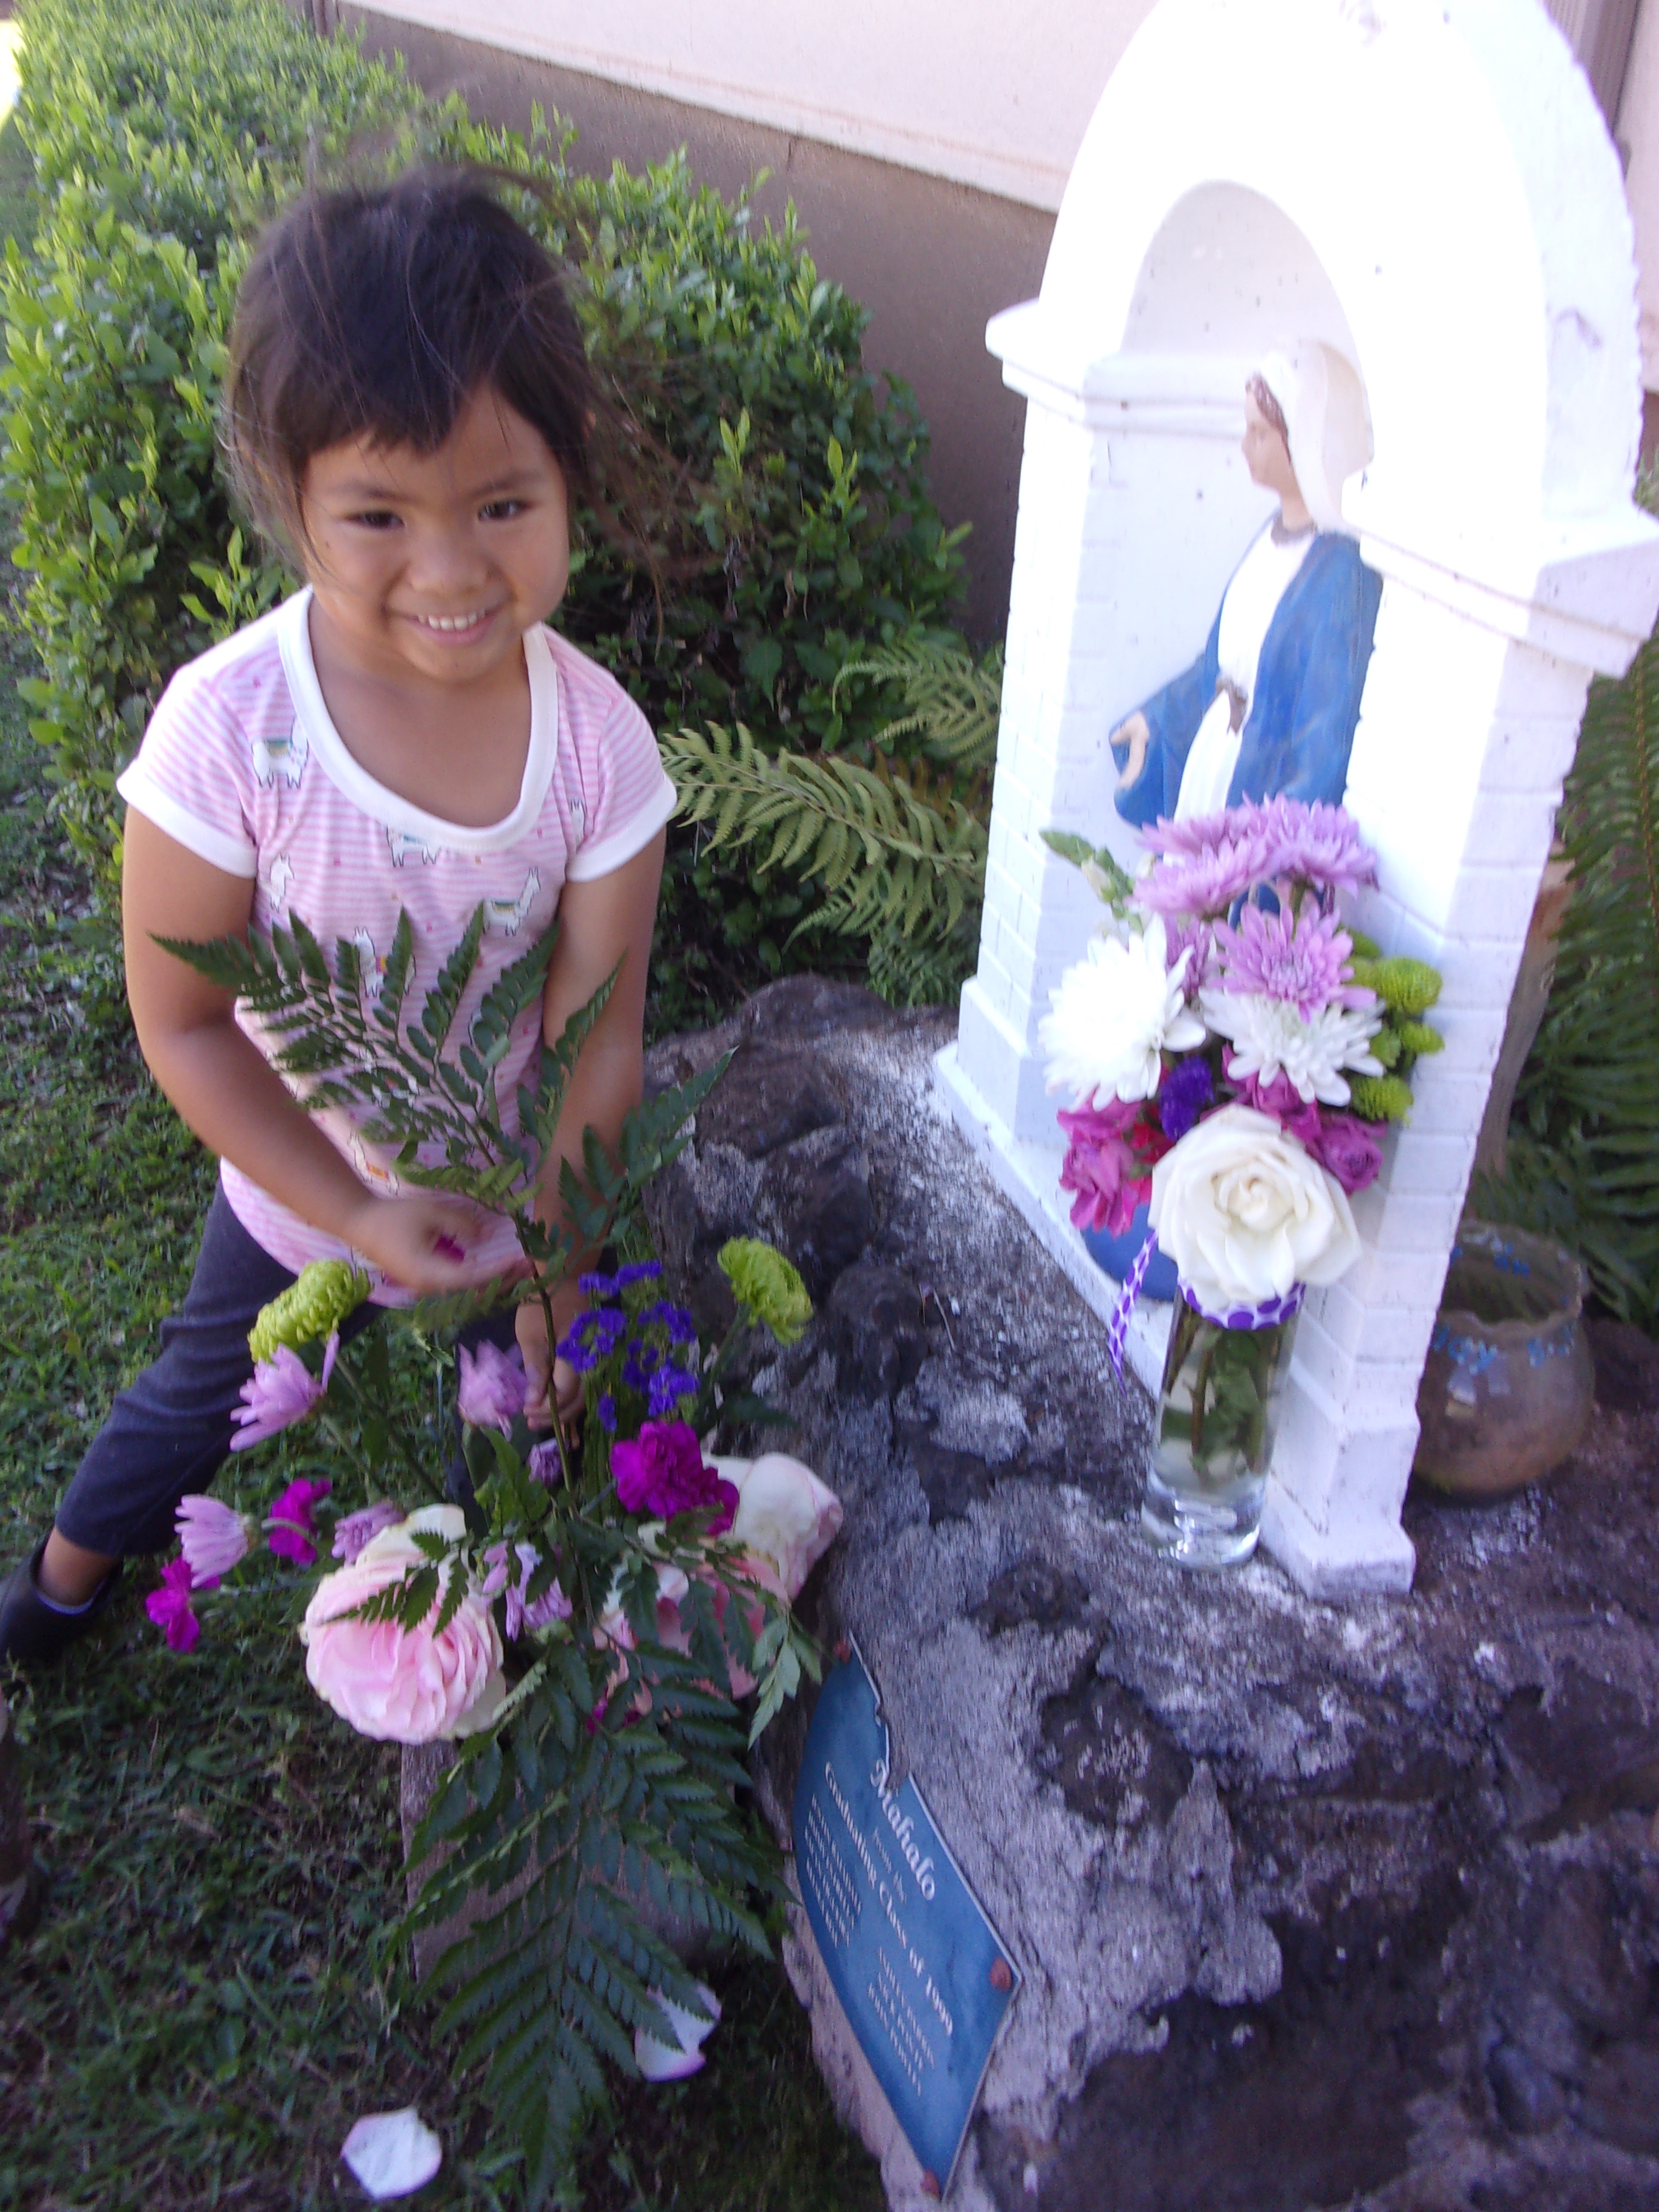 Student Preesenting Flowers to Statue of Mary